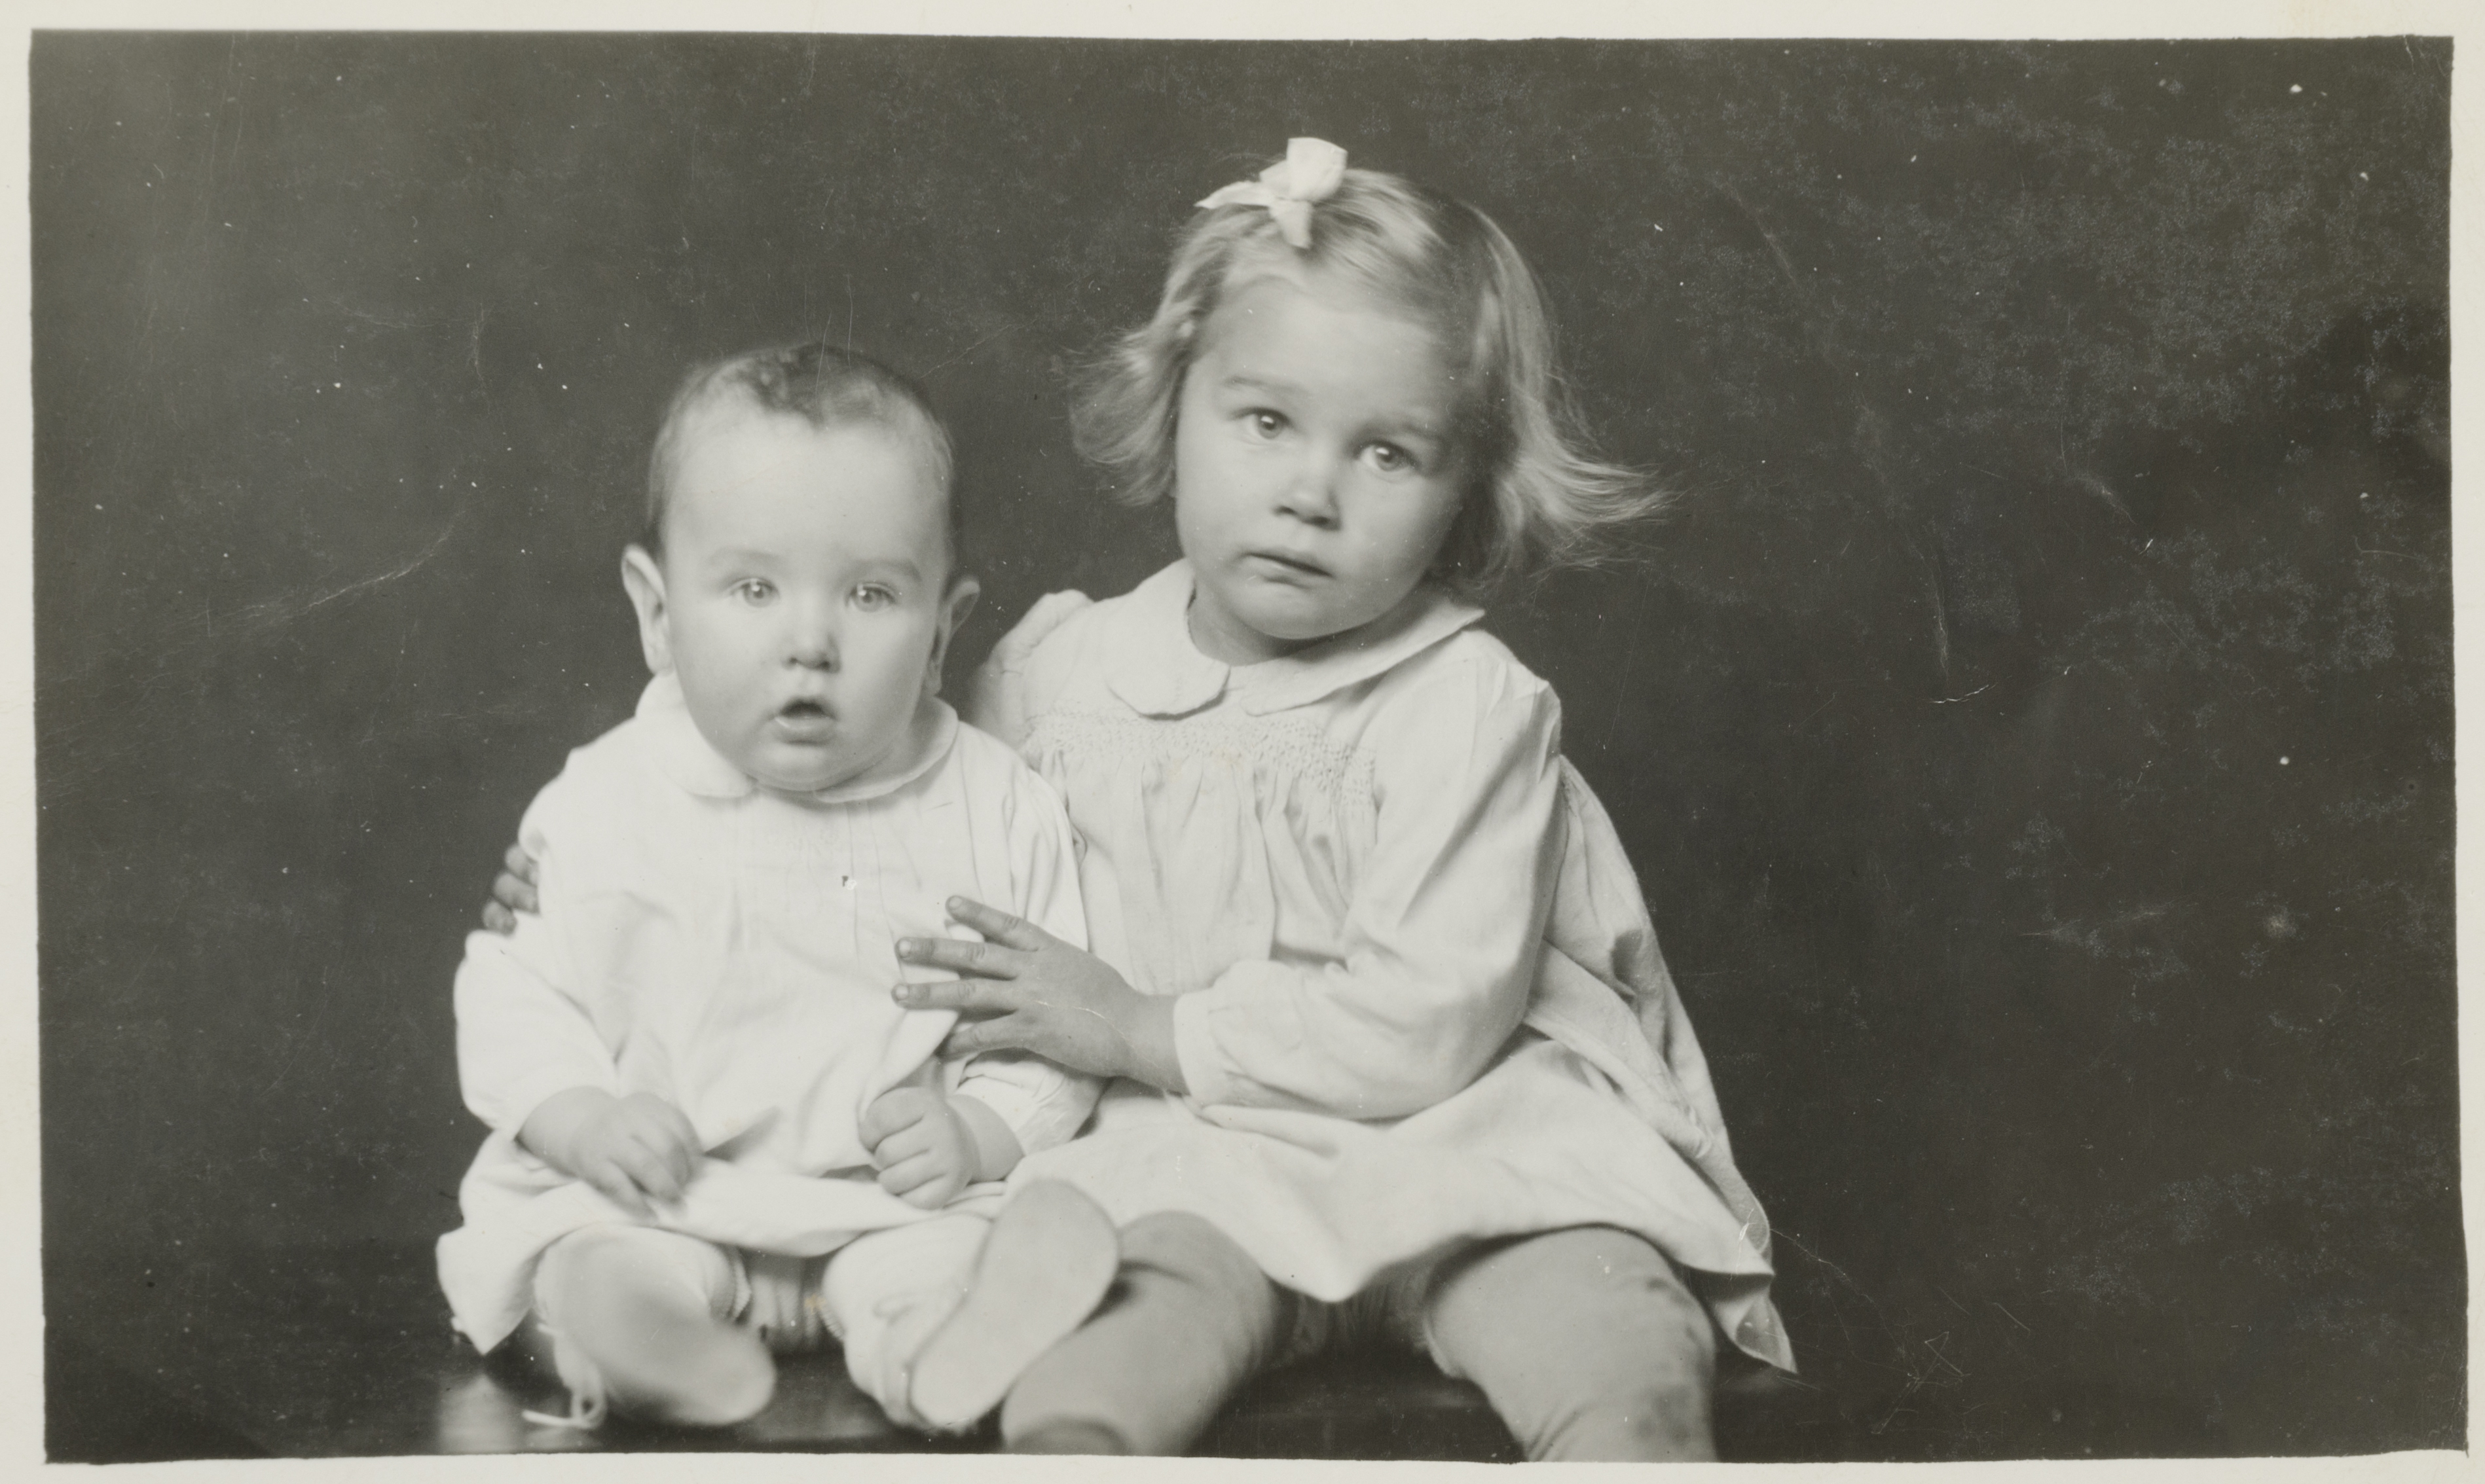 Little girl with arms around baby sibling, both seated